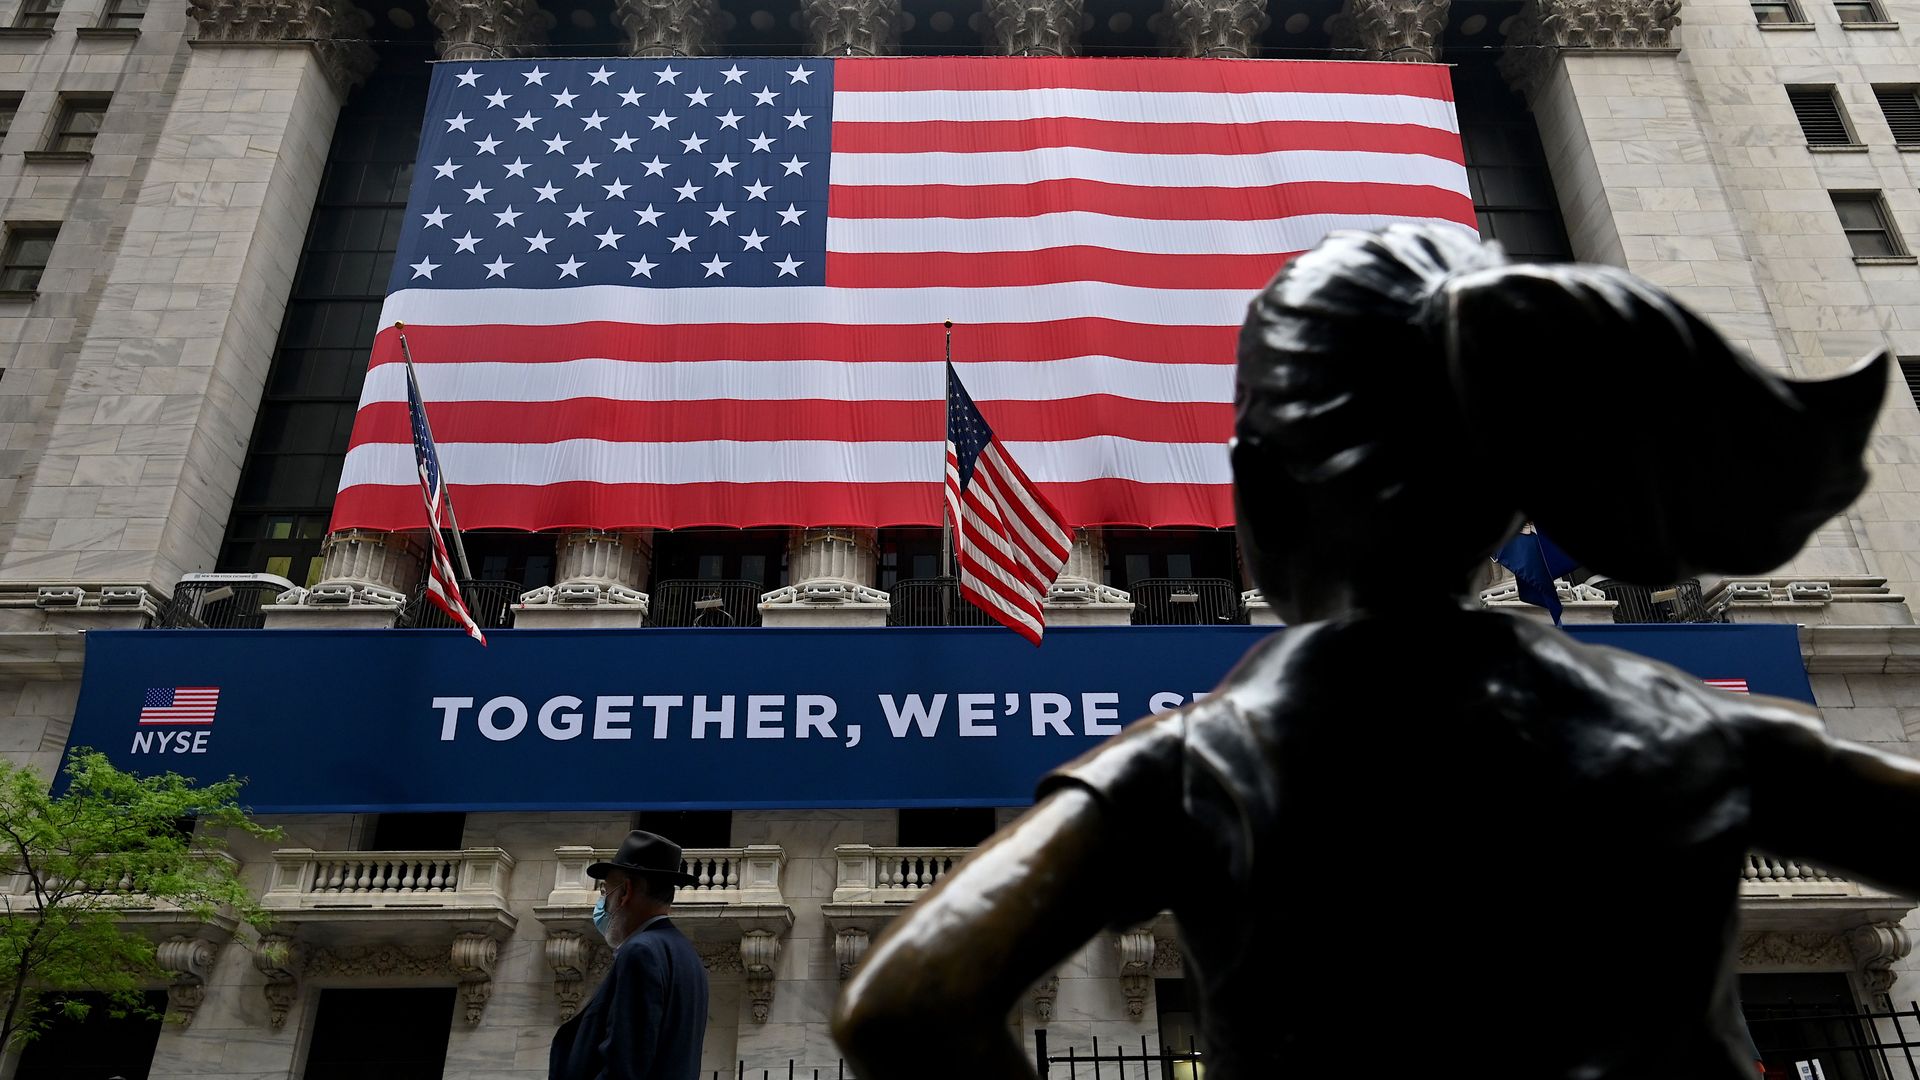 The New York Stock Exchange (NYSE) on May 26, 2020 on Wall Street in New York City. 